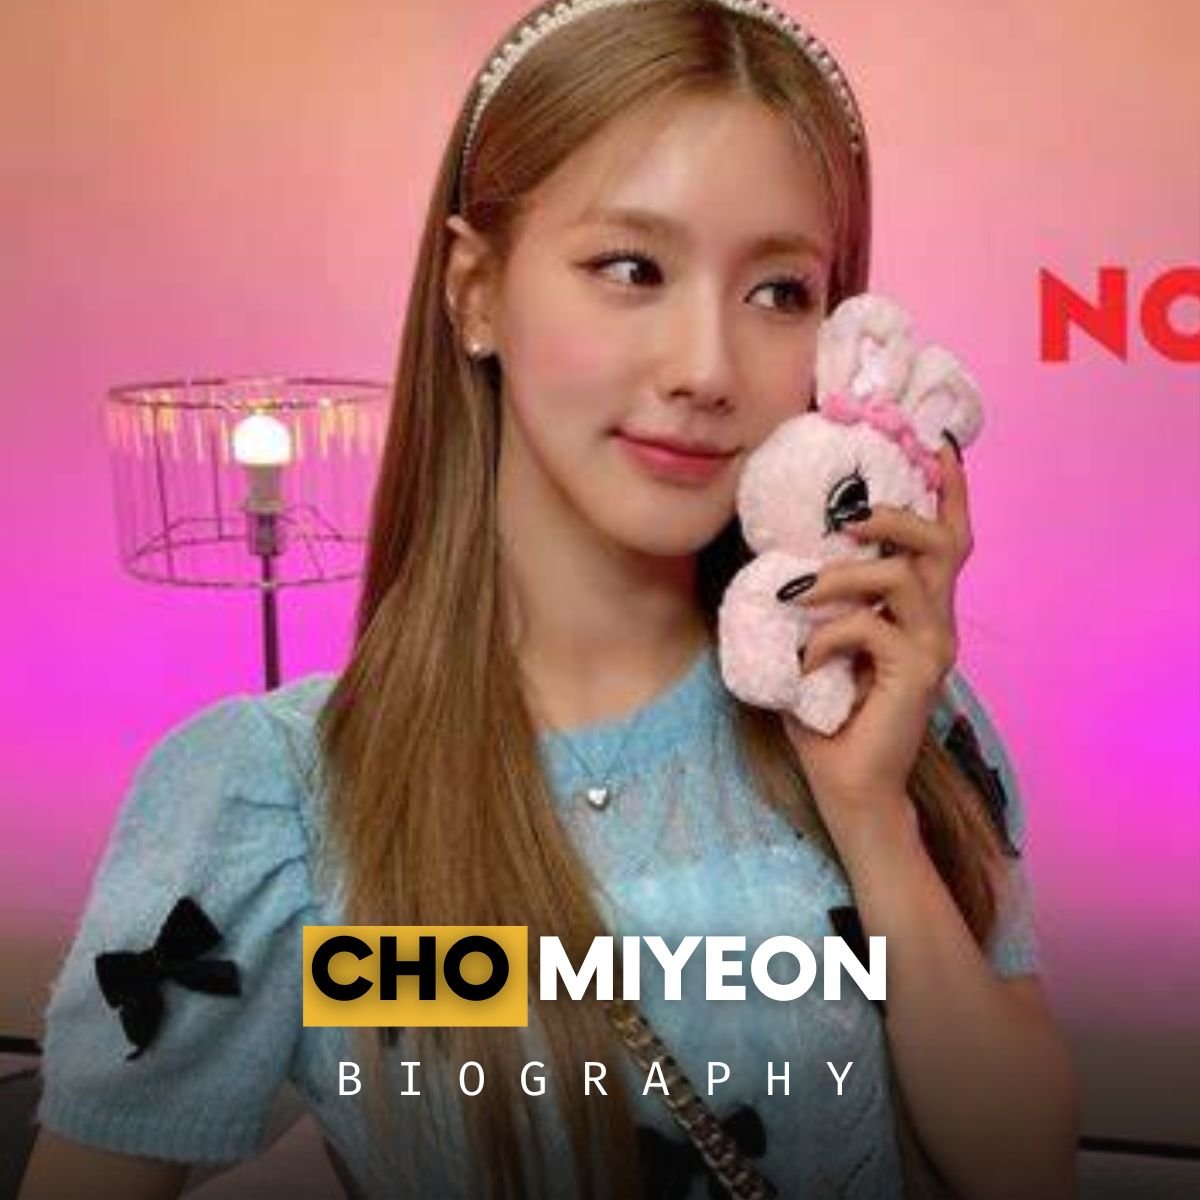 Who Is Cho Miyeon? An Insider To The Life Of Korean Singer